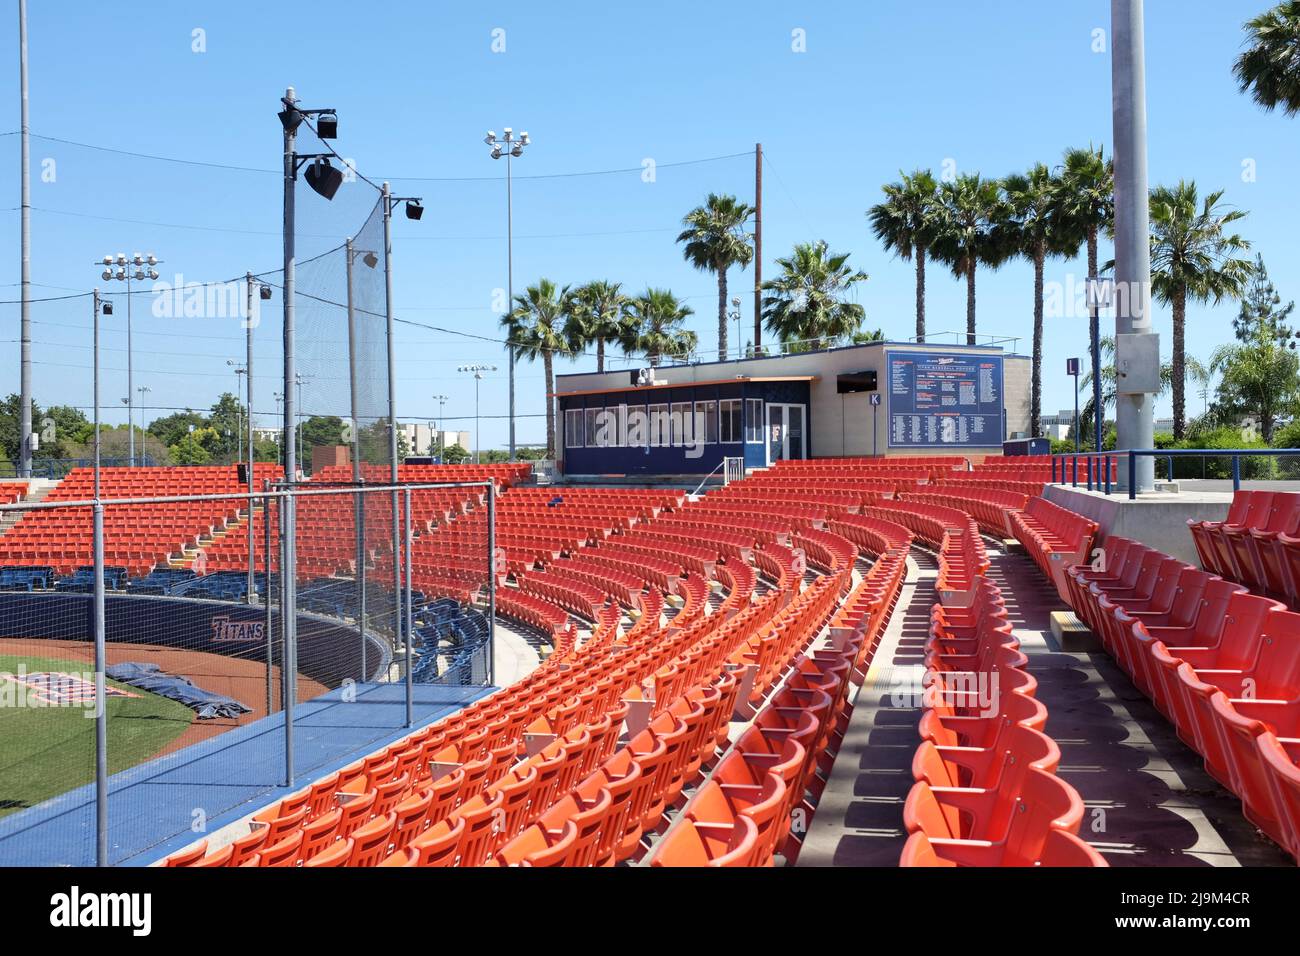 FULLERTON CALIFORNIA - 22 MAY 2020: Third Base seating at Goodwin Field, looking towards the Press Box, on the campus of California State University F Stock Photo